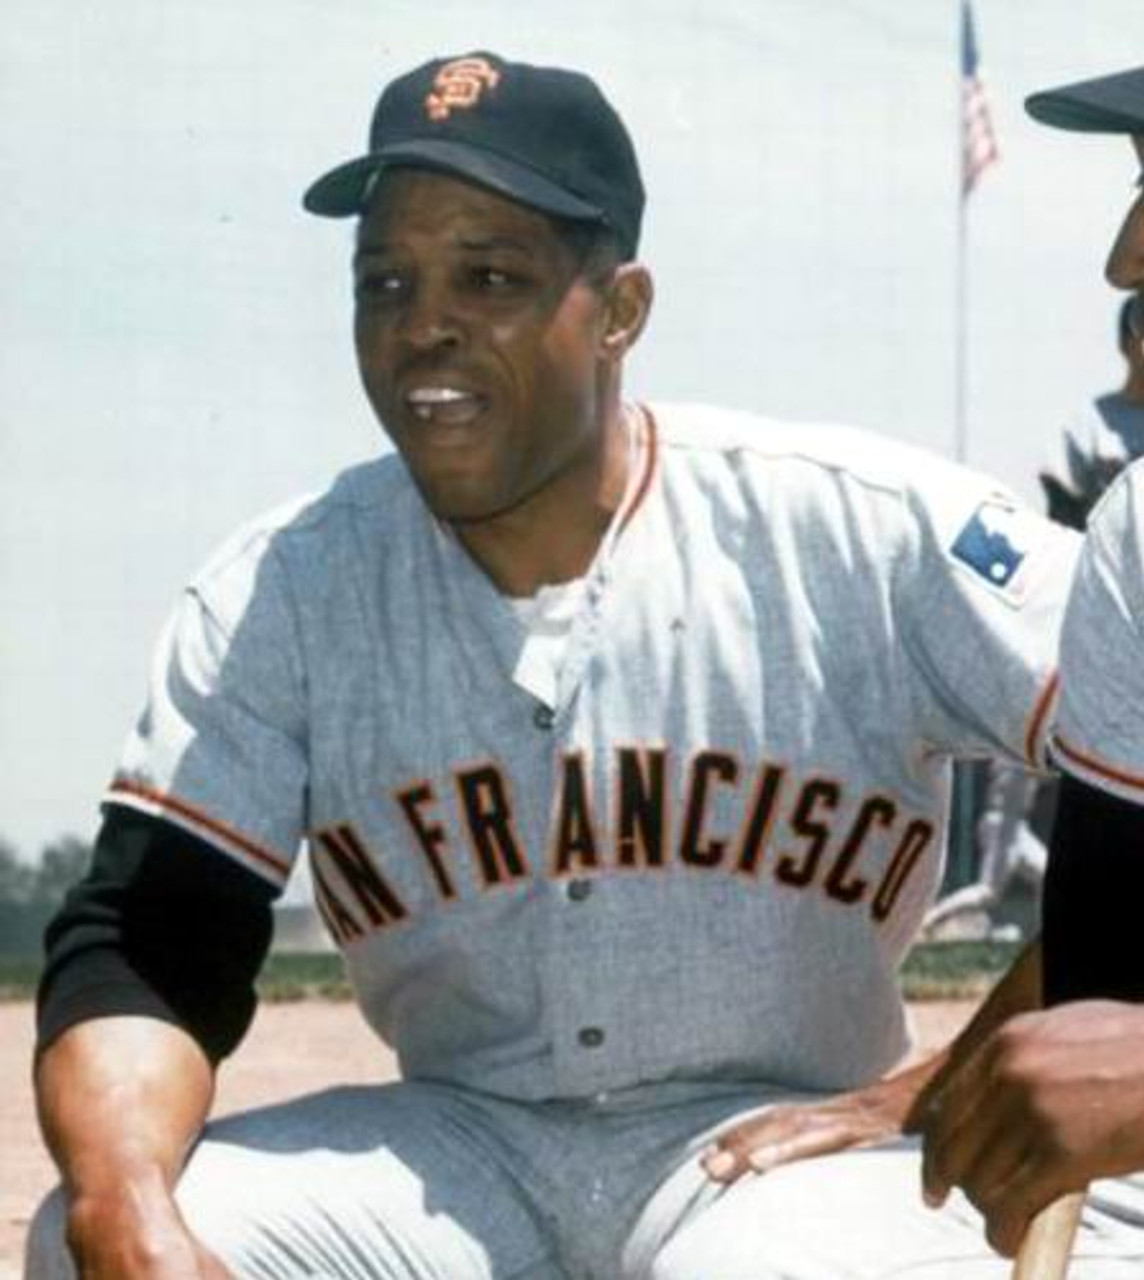 San Francisco Giants Willie Mays Throwback Majestic T Shirt